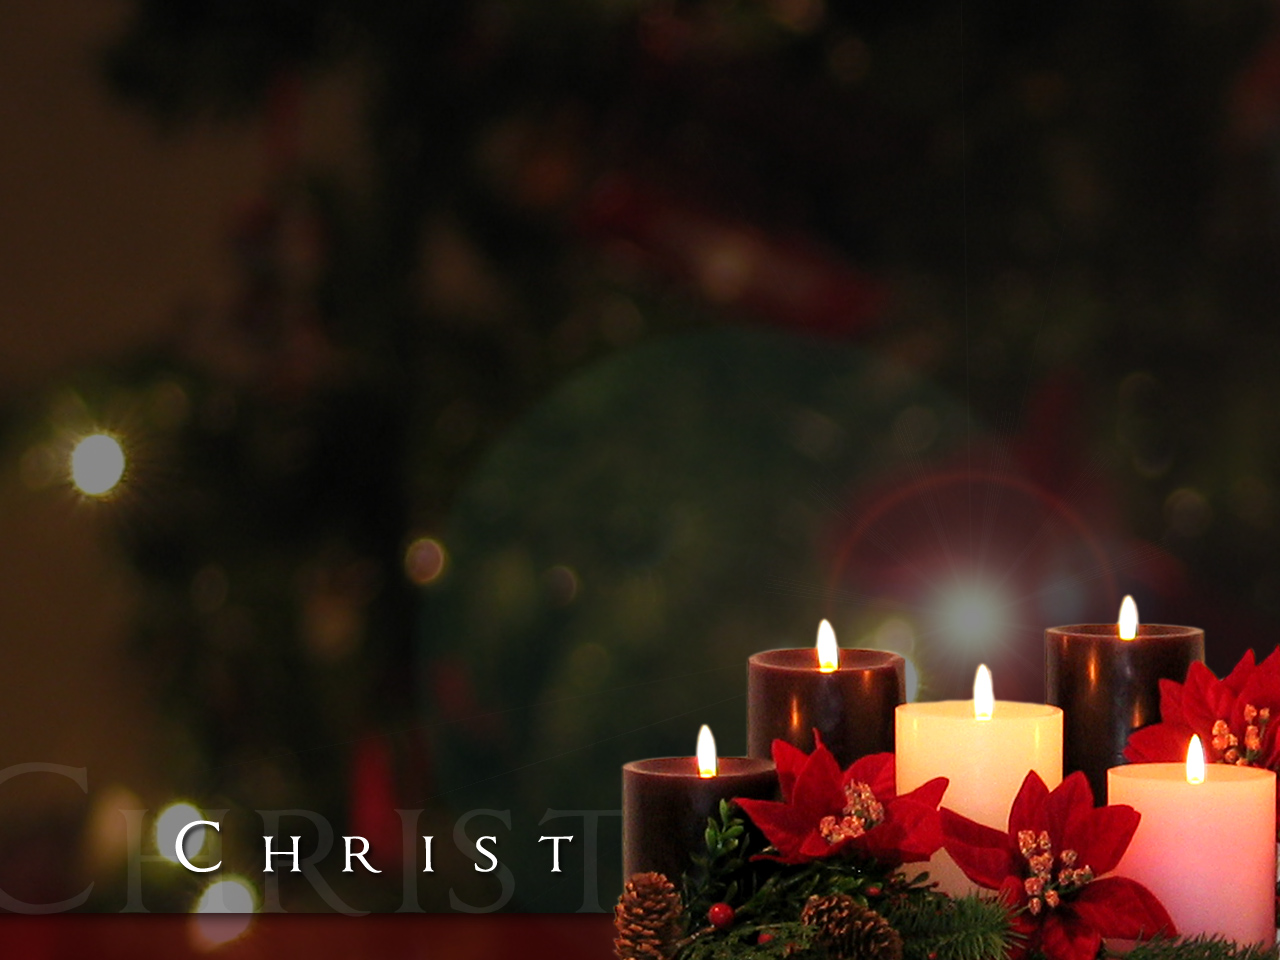 free-download-celebrating-advent-church-powerpoint-template-christmas